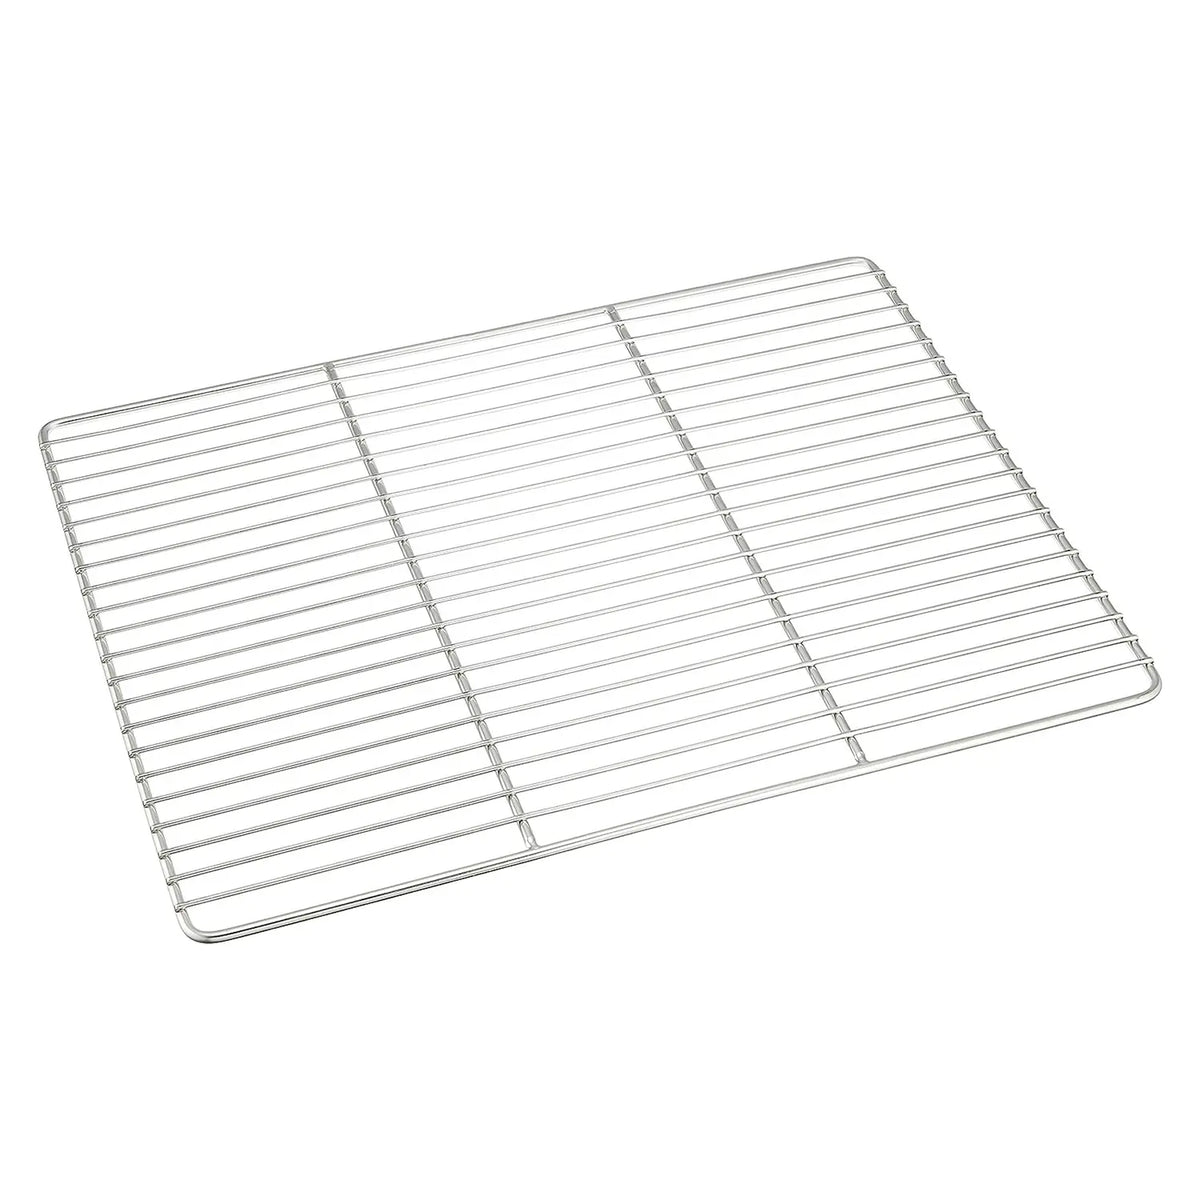 SUNCRAFT Patissiere Stainless Steel Round Cake Cooling Rack with Feet -  Globalkitchen Japan